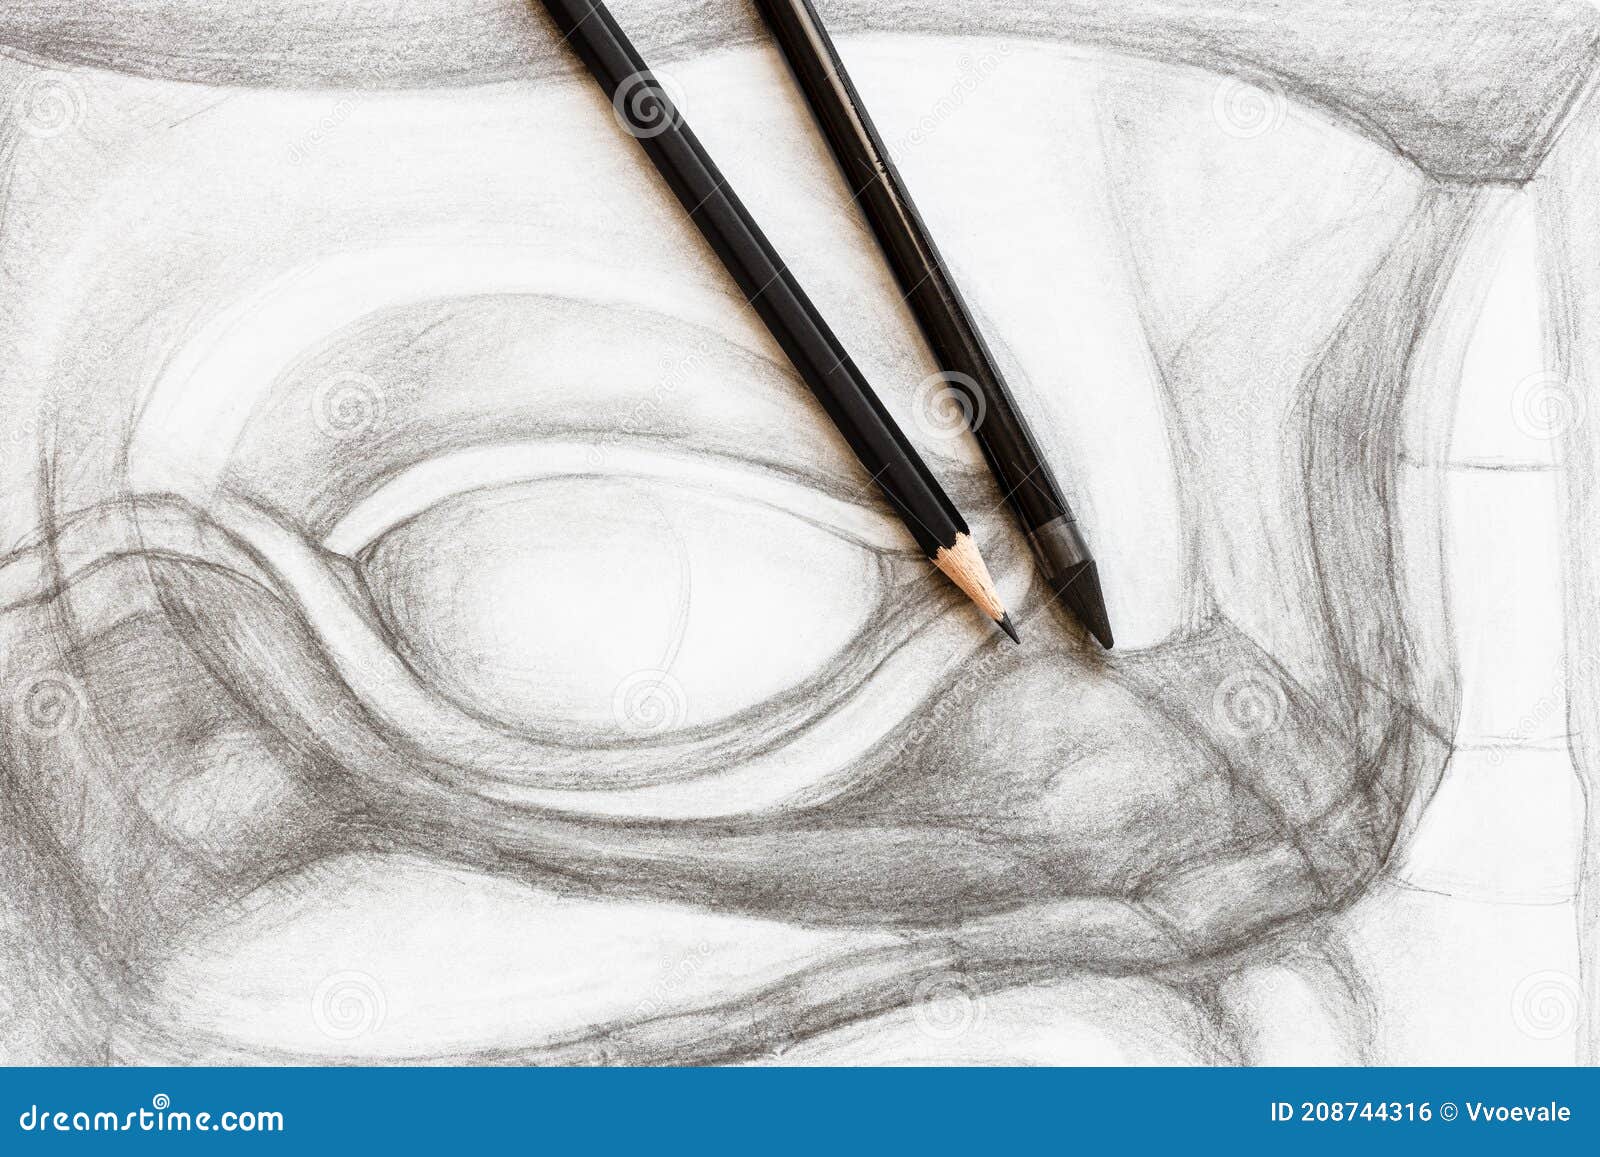 Glorious graphite the history and restoration of pencil drawings